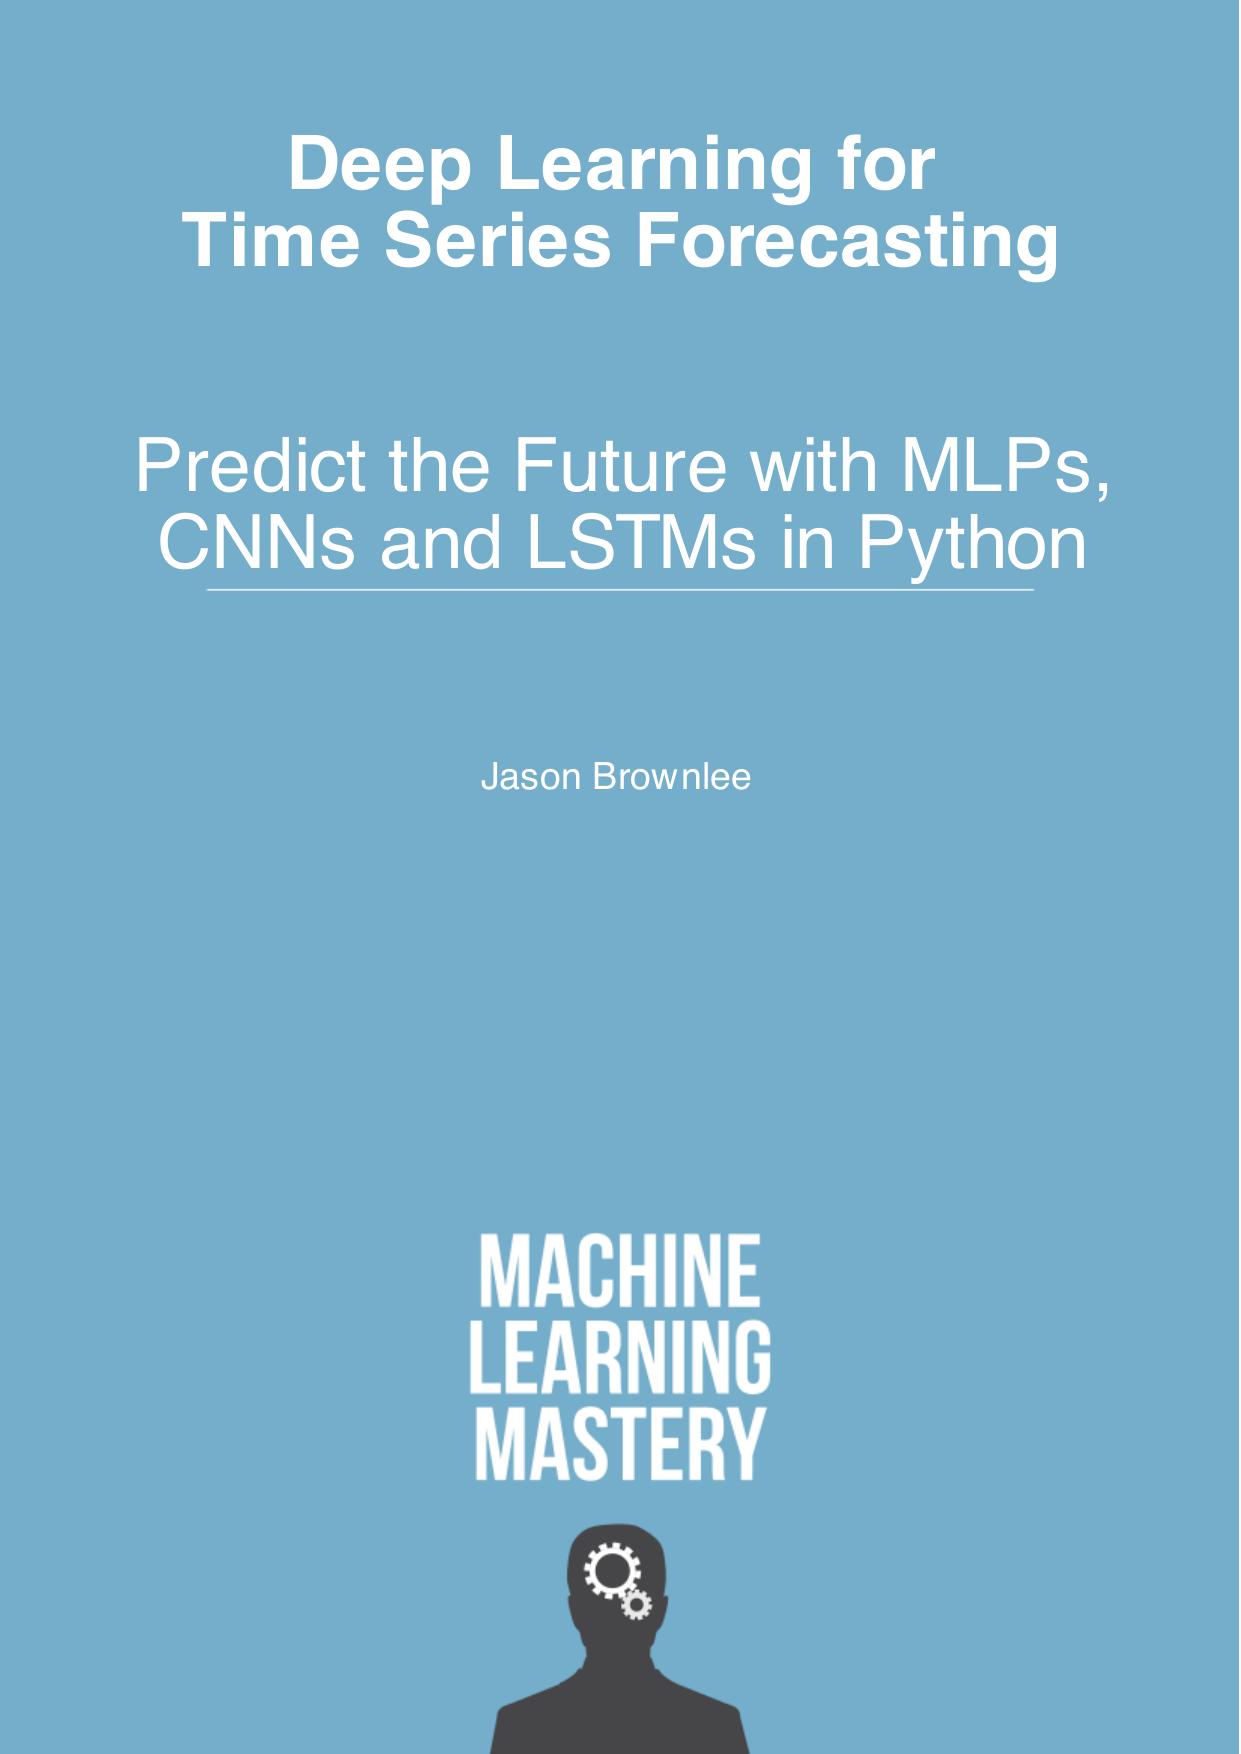 Deep Learning for Time Series Forecasting: Predict the Future With MLPs, CNNs and LSTMs in Python